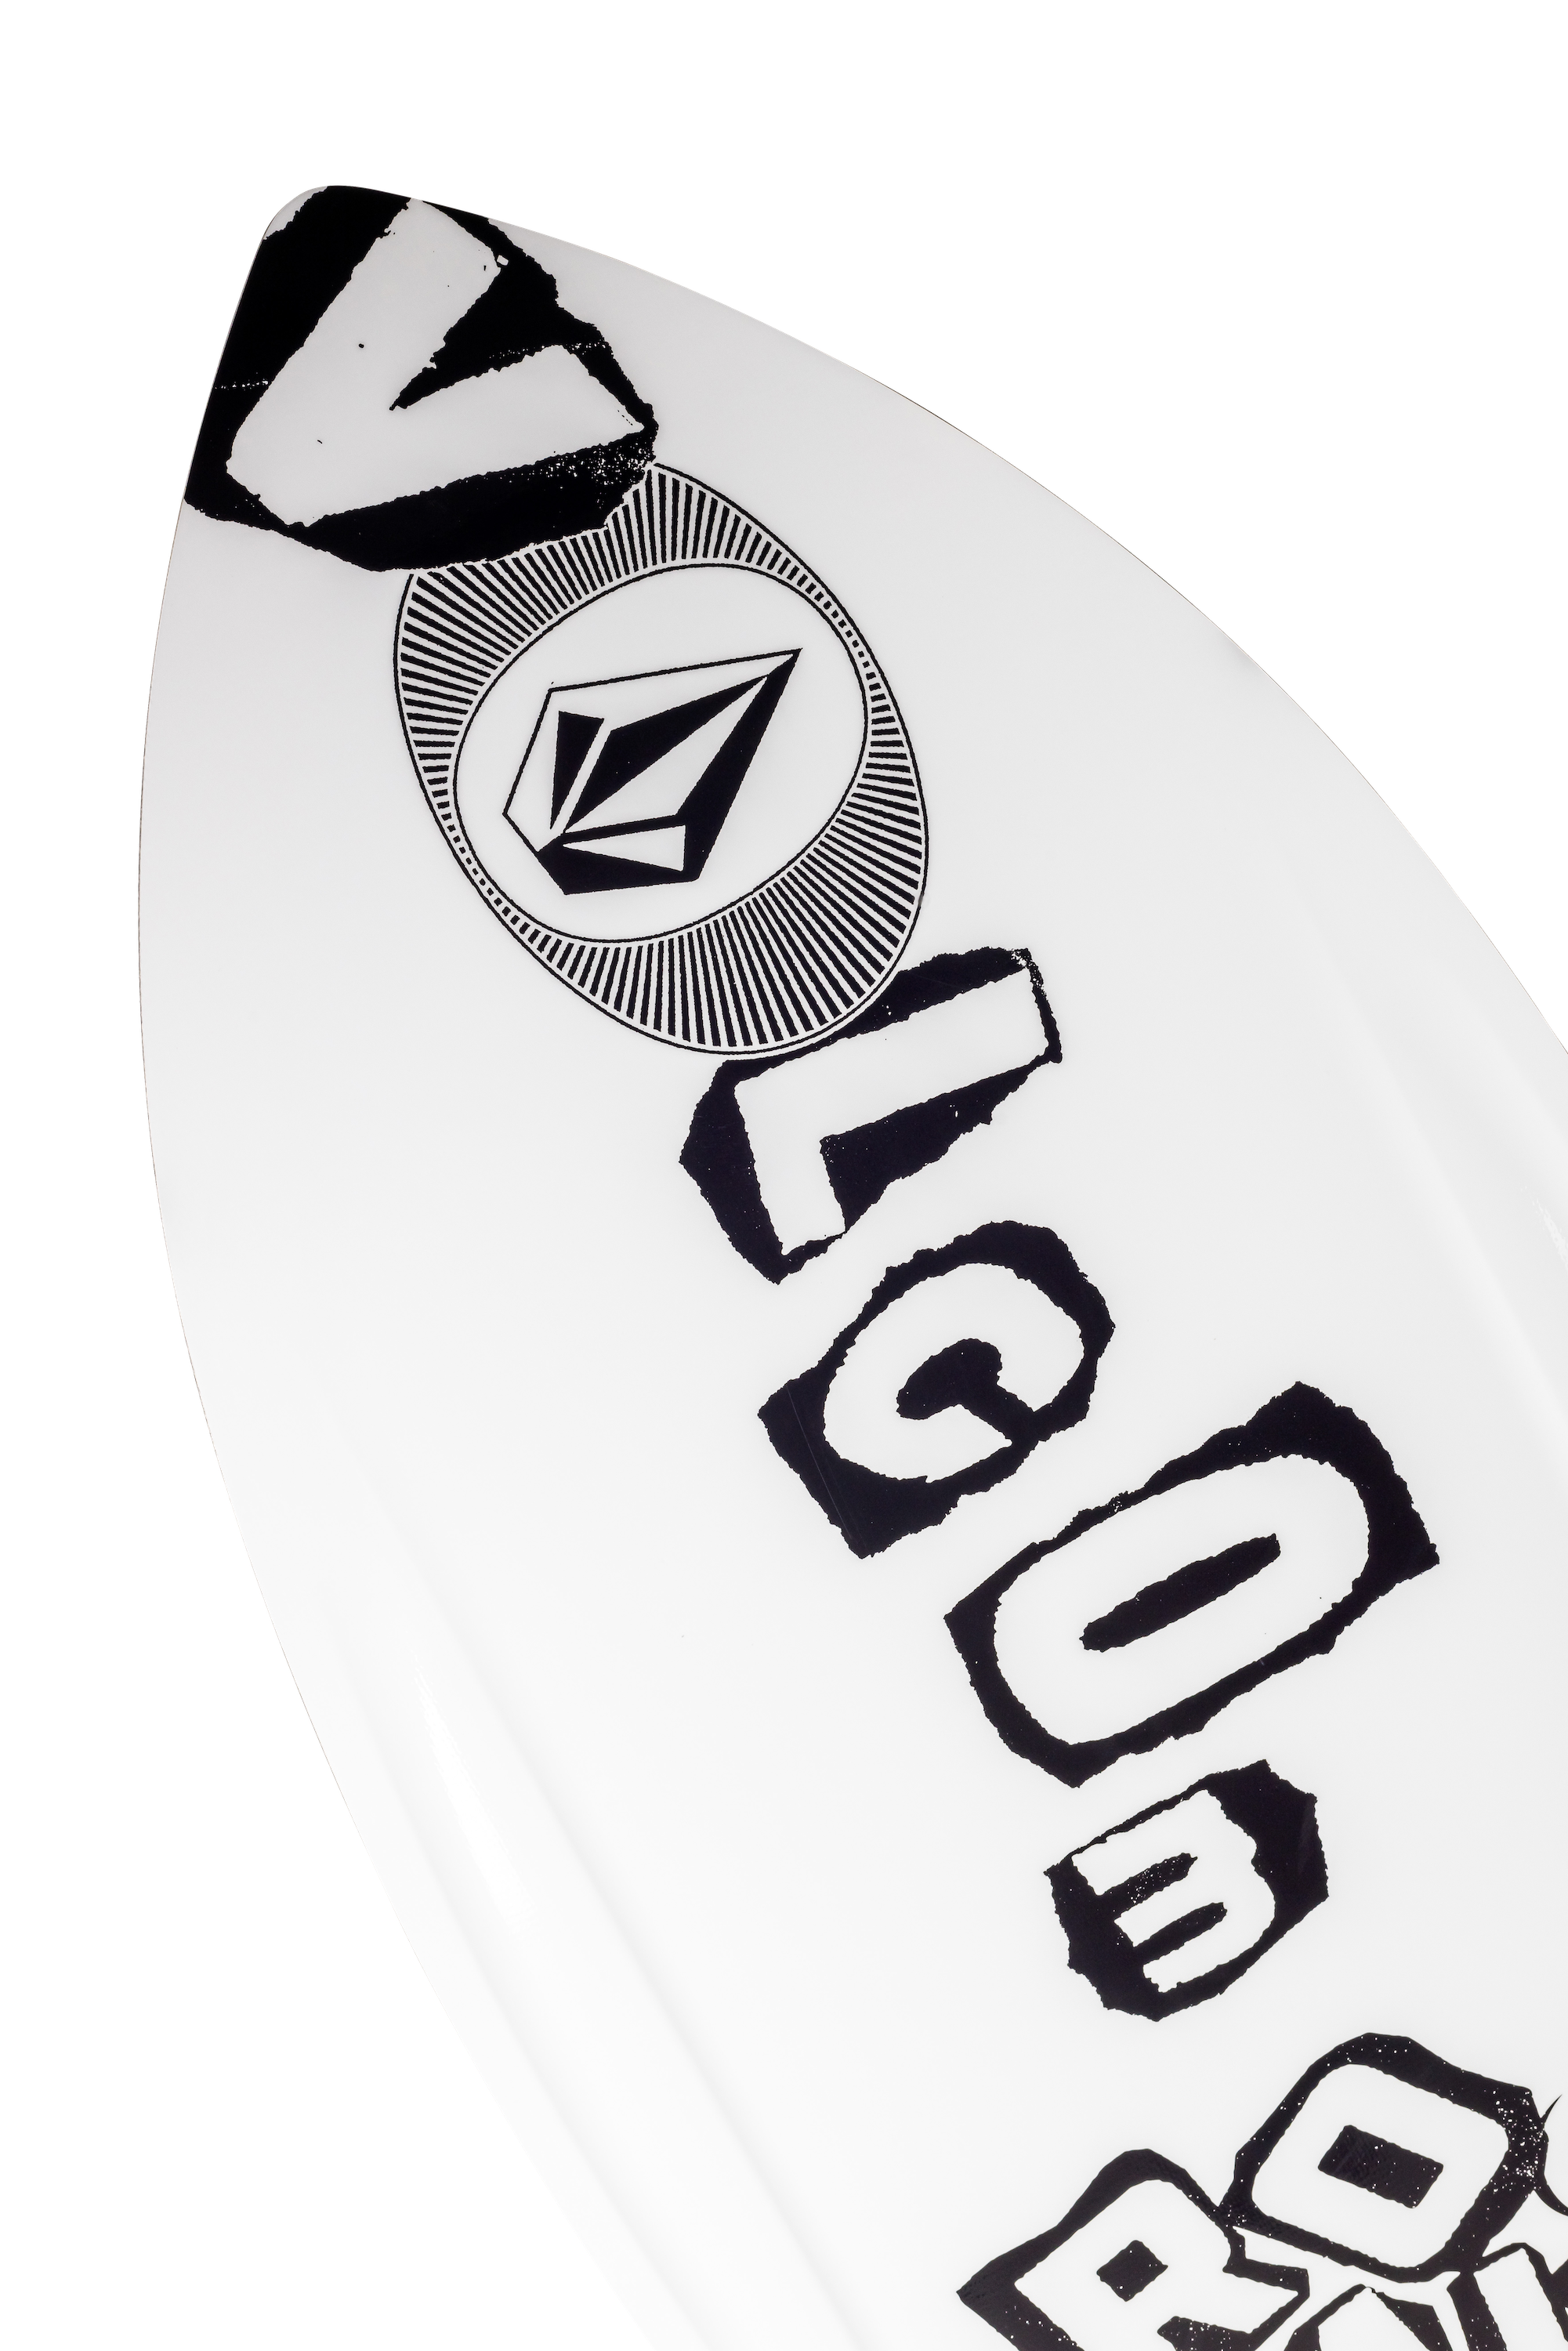 A Ronix 2024 Volcom Sea Captain wakesurf board with exceptional edge hold, featuring a white design with black letters on it. Ideal for surfer enthusiasts looking for optimal control and stability in the waves.